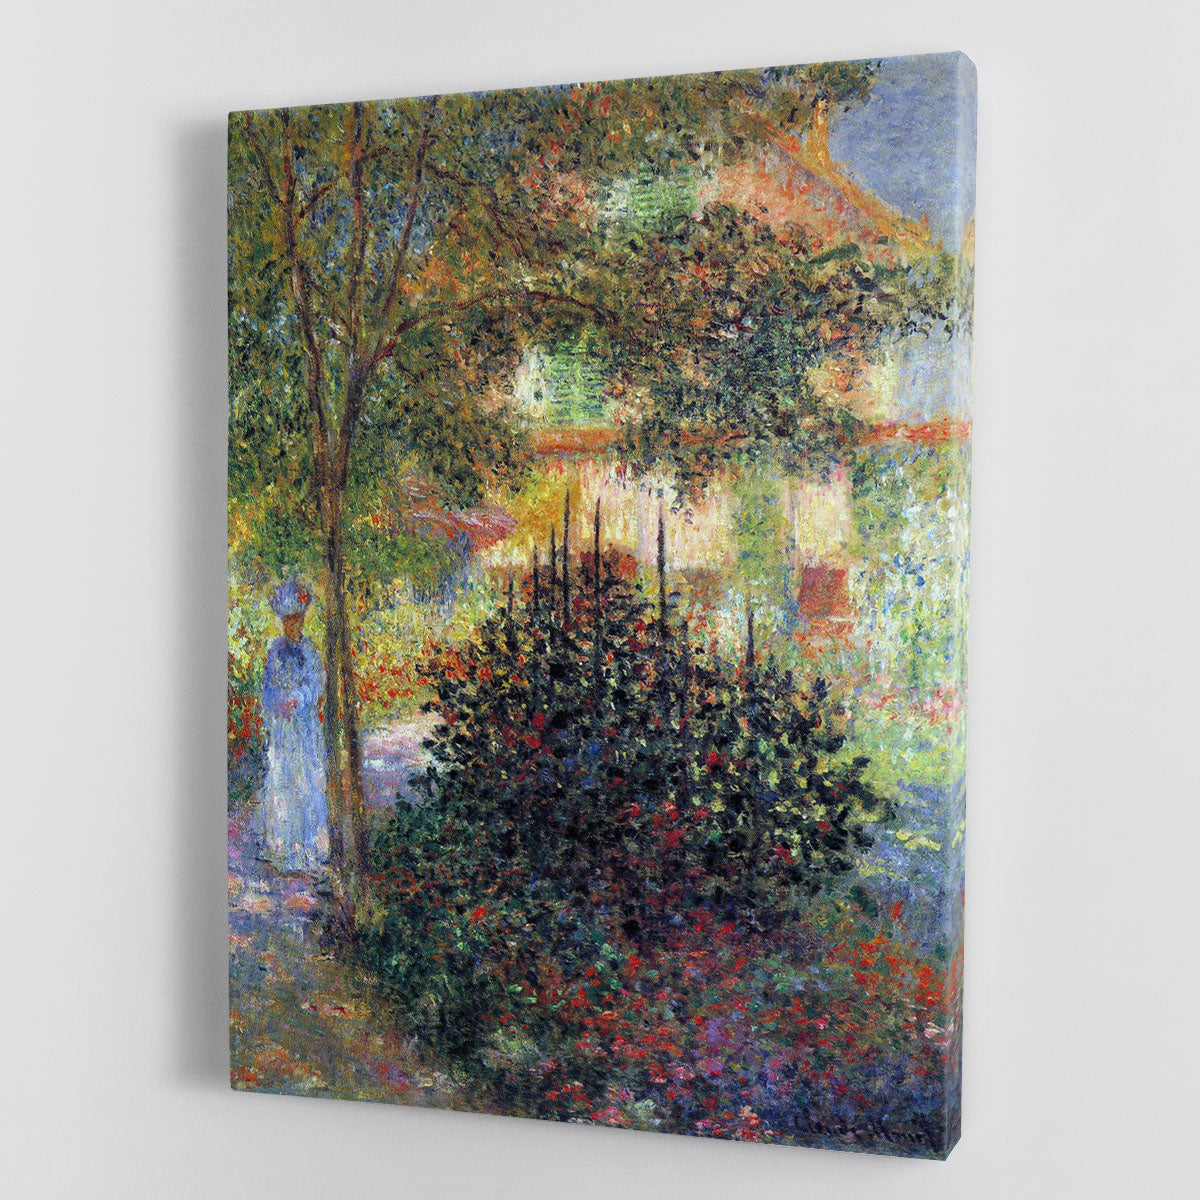 Camille in the garden of the house in Argenteuil by Monet Canvas Print or Poster - Canvas Art Rocks - 1